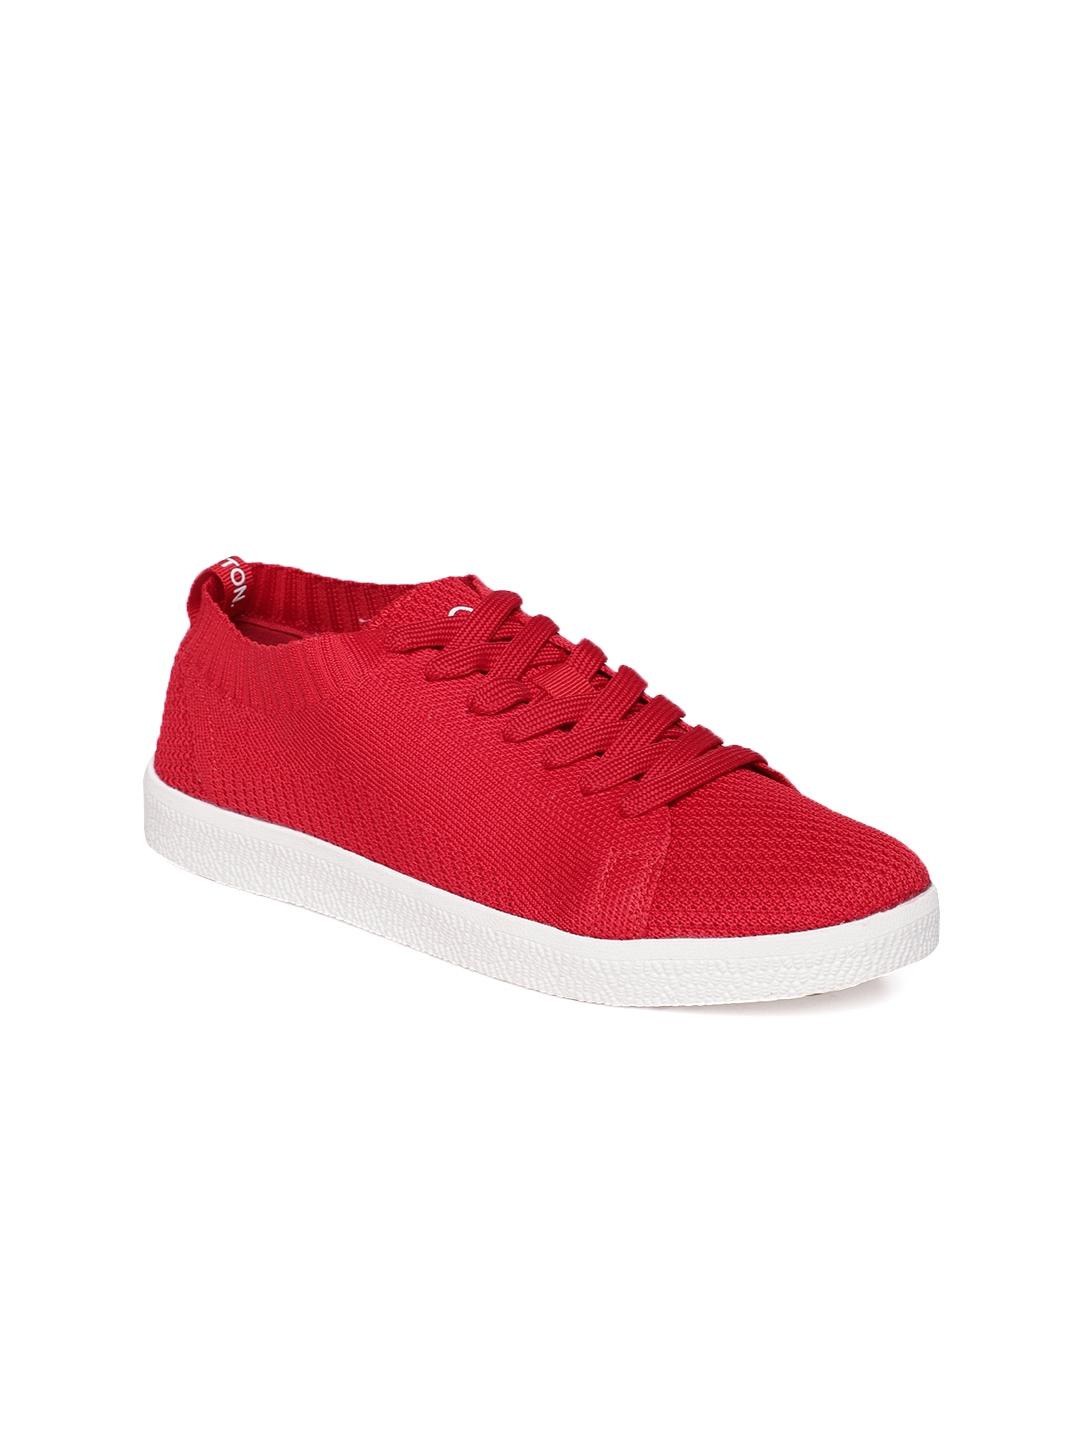 red sneakers for women